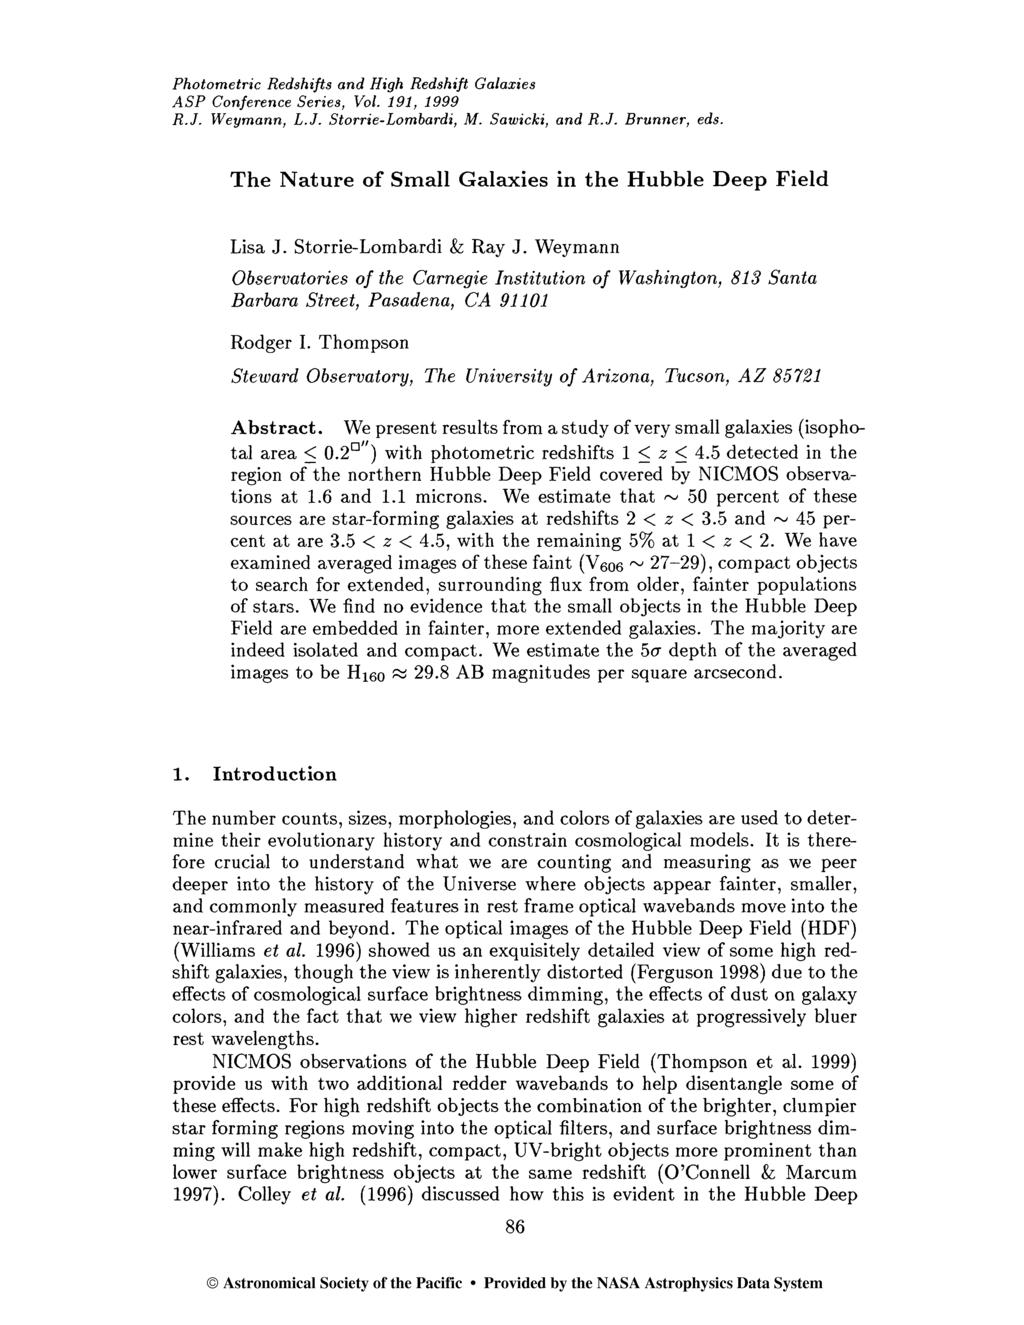 Photometric Redshifts and High Redshift Galaxies ASP Conference Series, Vol. 191, 1999 R.J. Weymann, L.J. Storrie-Lombardi, M. Sawicki, and R.J. Brunner, eds.